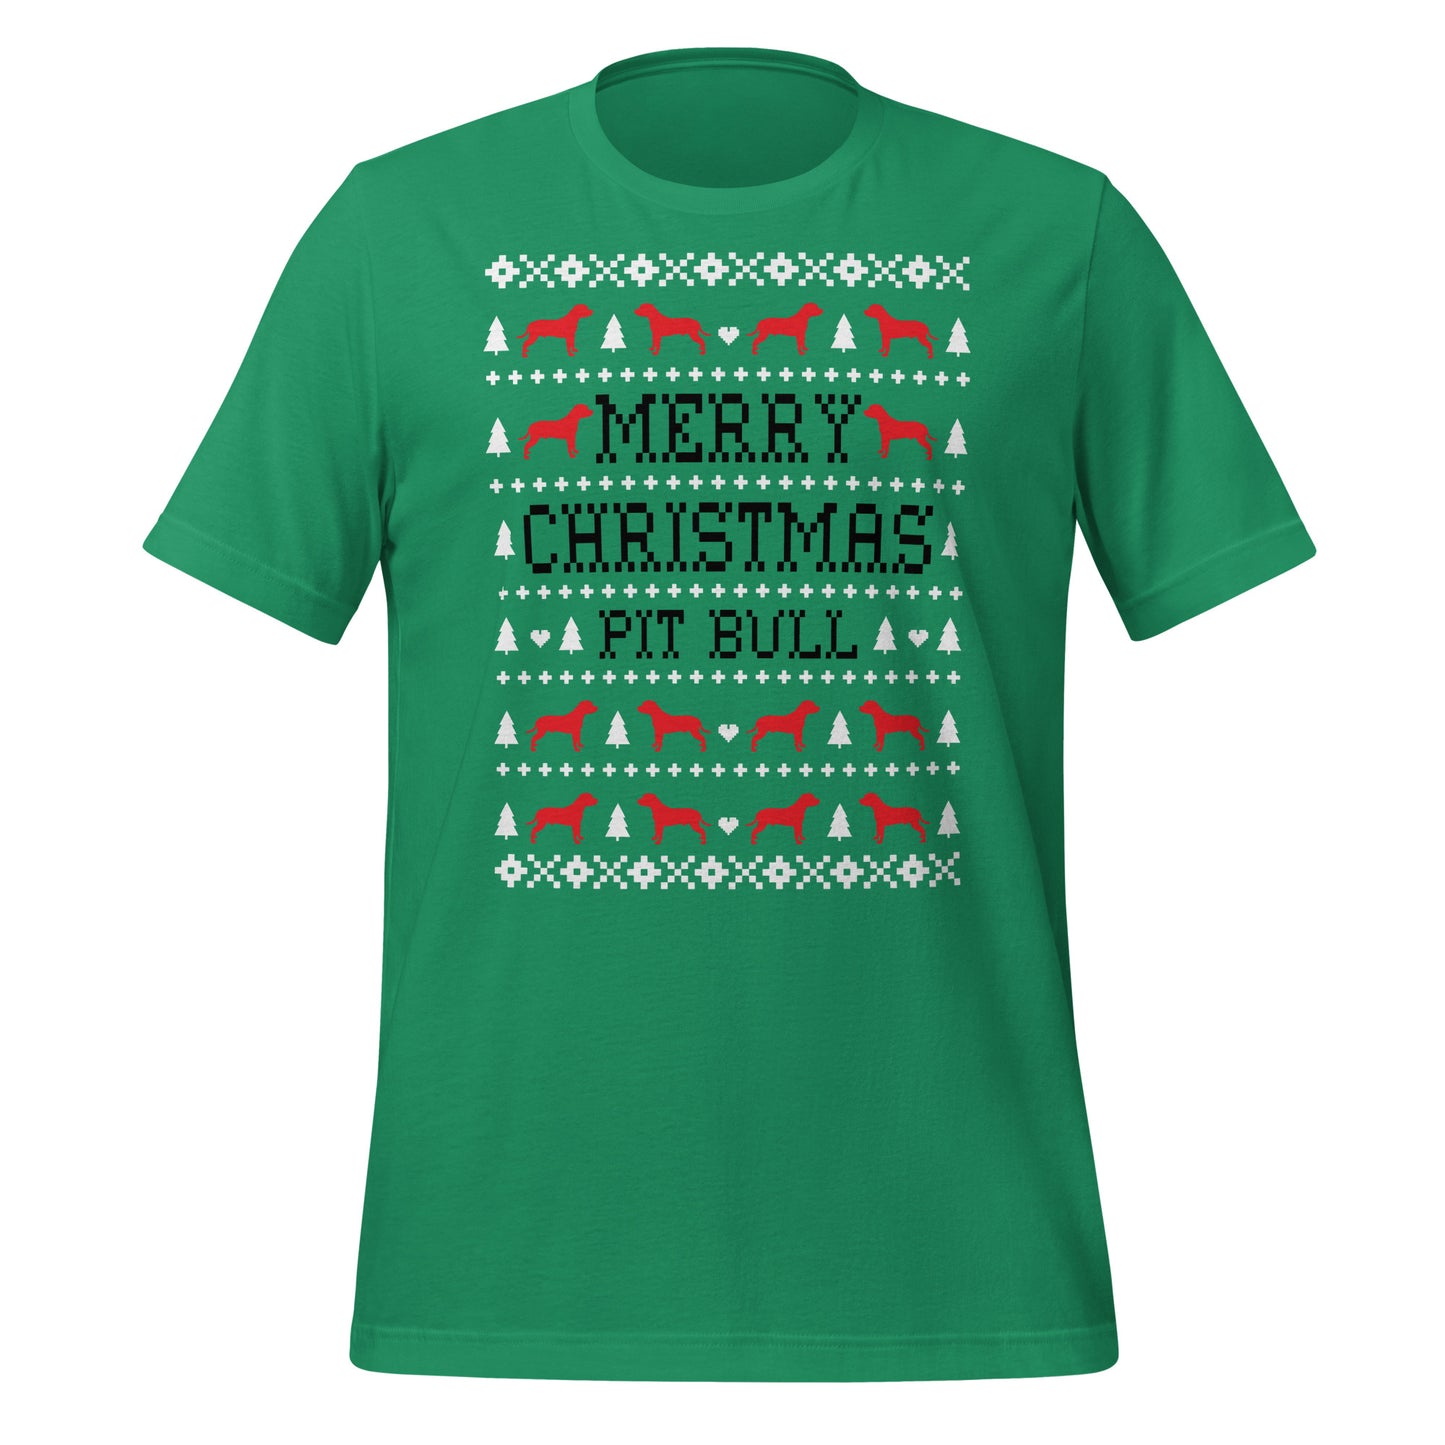 Pit Bull ugly Christmas unisex t-shirt green by Dog Artistry.